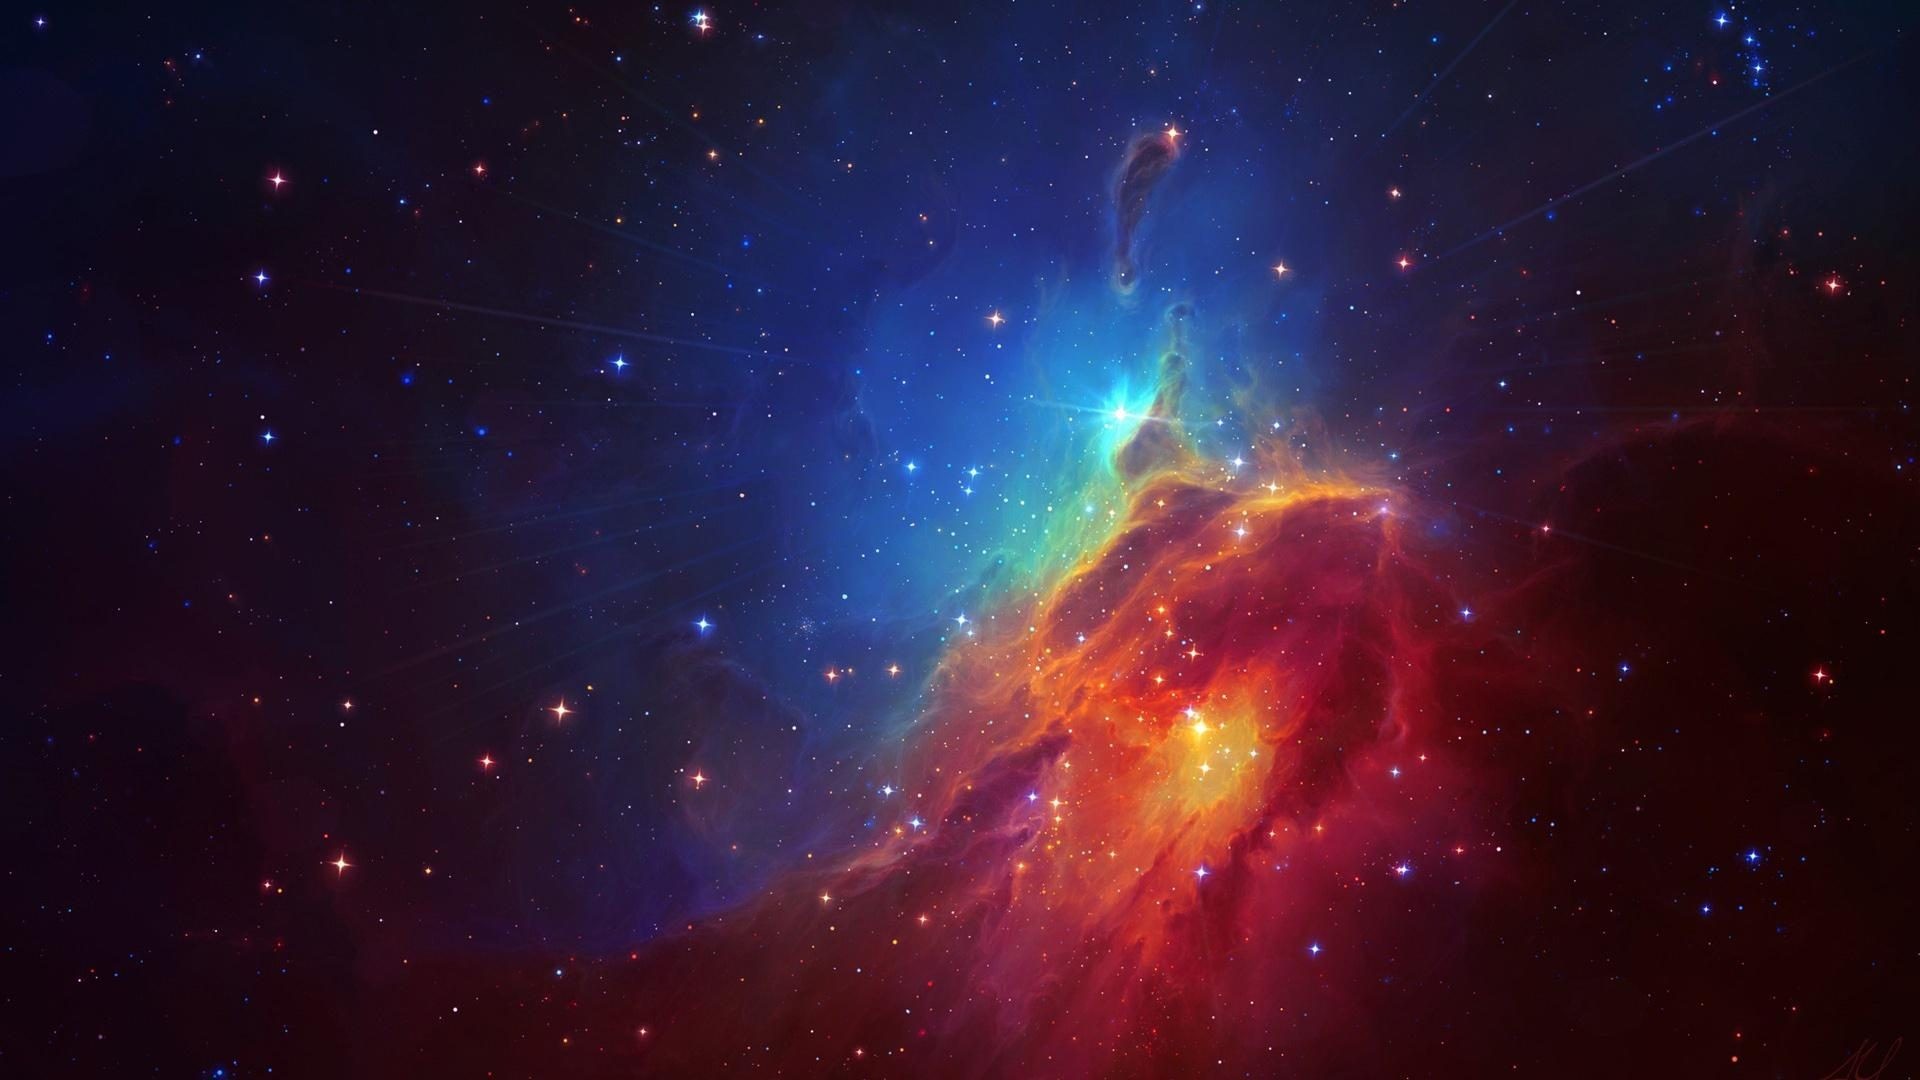 Galaxy Hd Wallpapers 1080p 75 Images